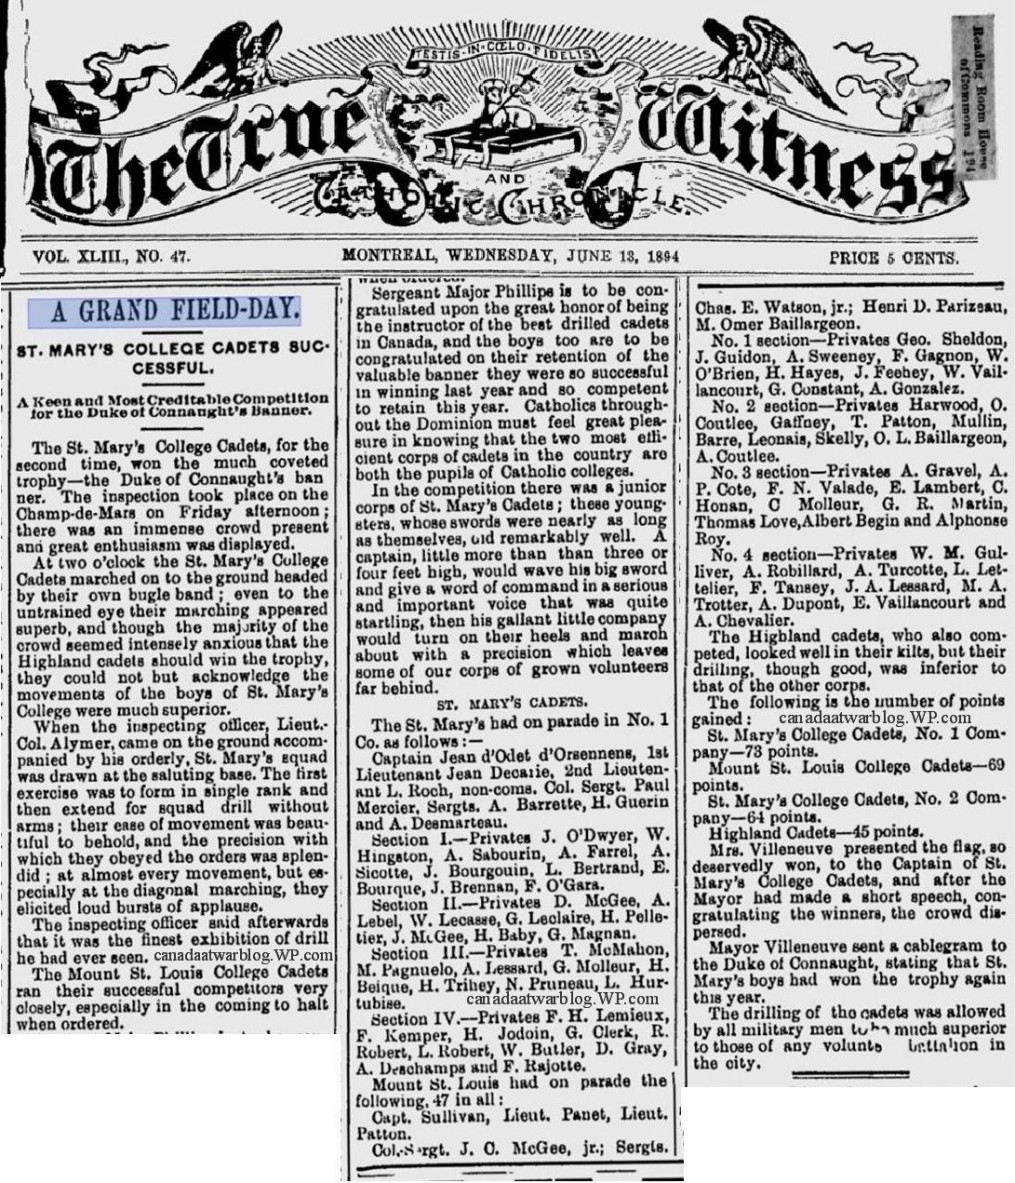 St. Mary's College Cadets, Montreal's The True Witness & Catholic Chronicals, Wed., June 13th, 1894. 